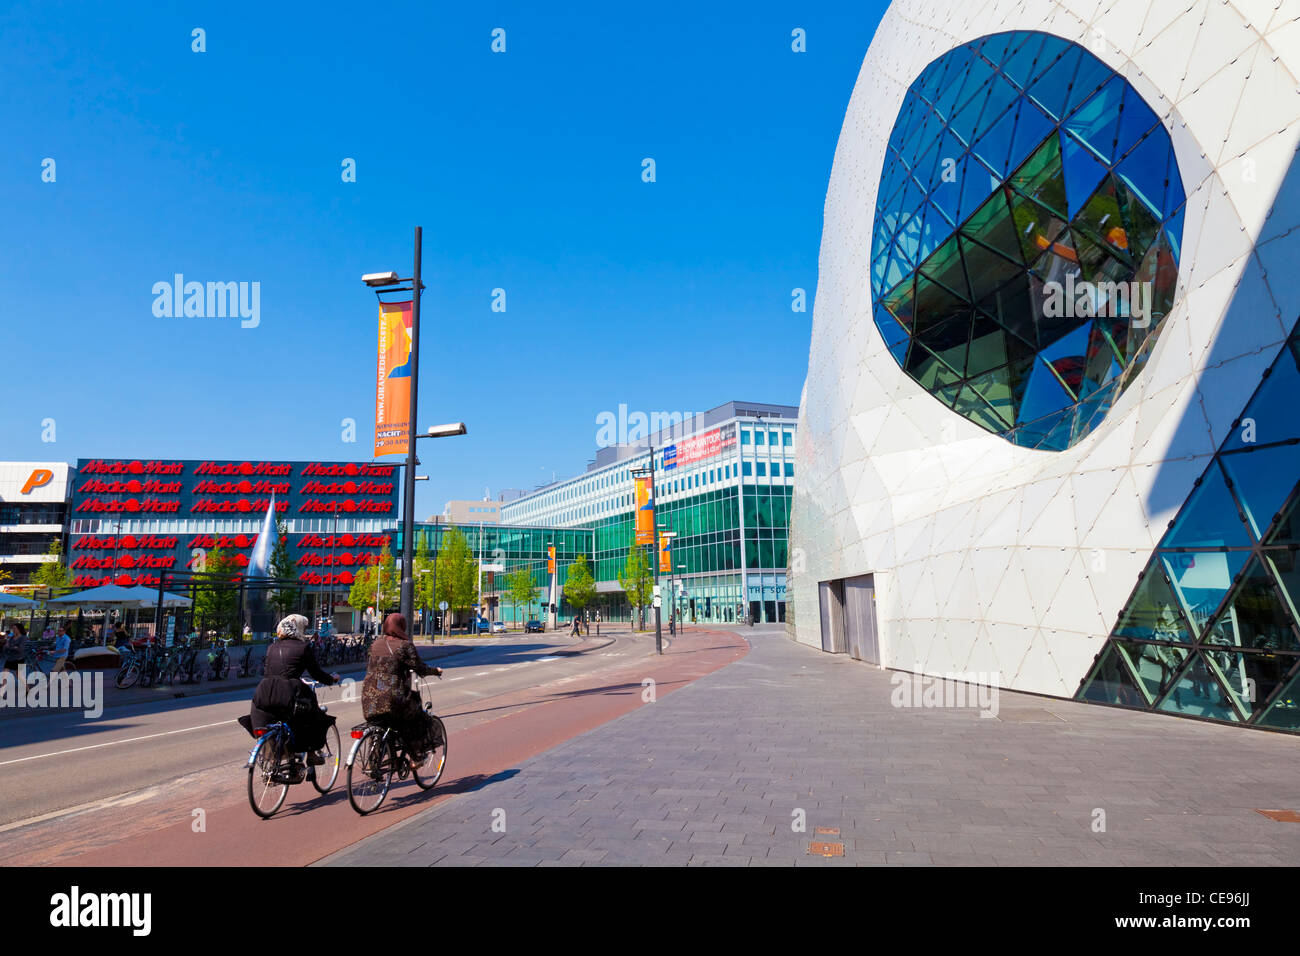 Two muslim women on bicycles in downtown Eindhoven, Netherlands Stock Photo